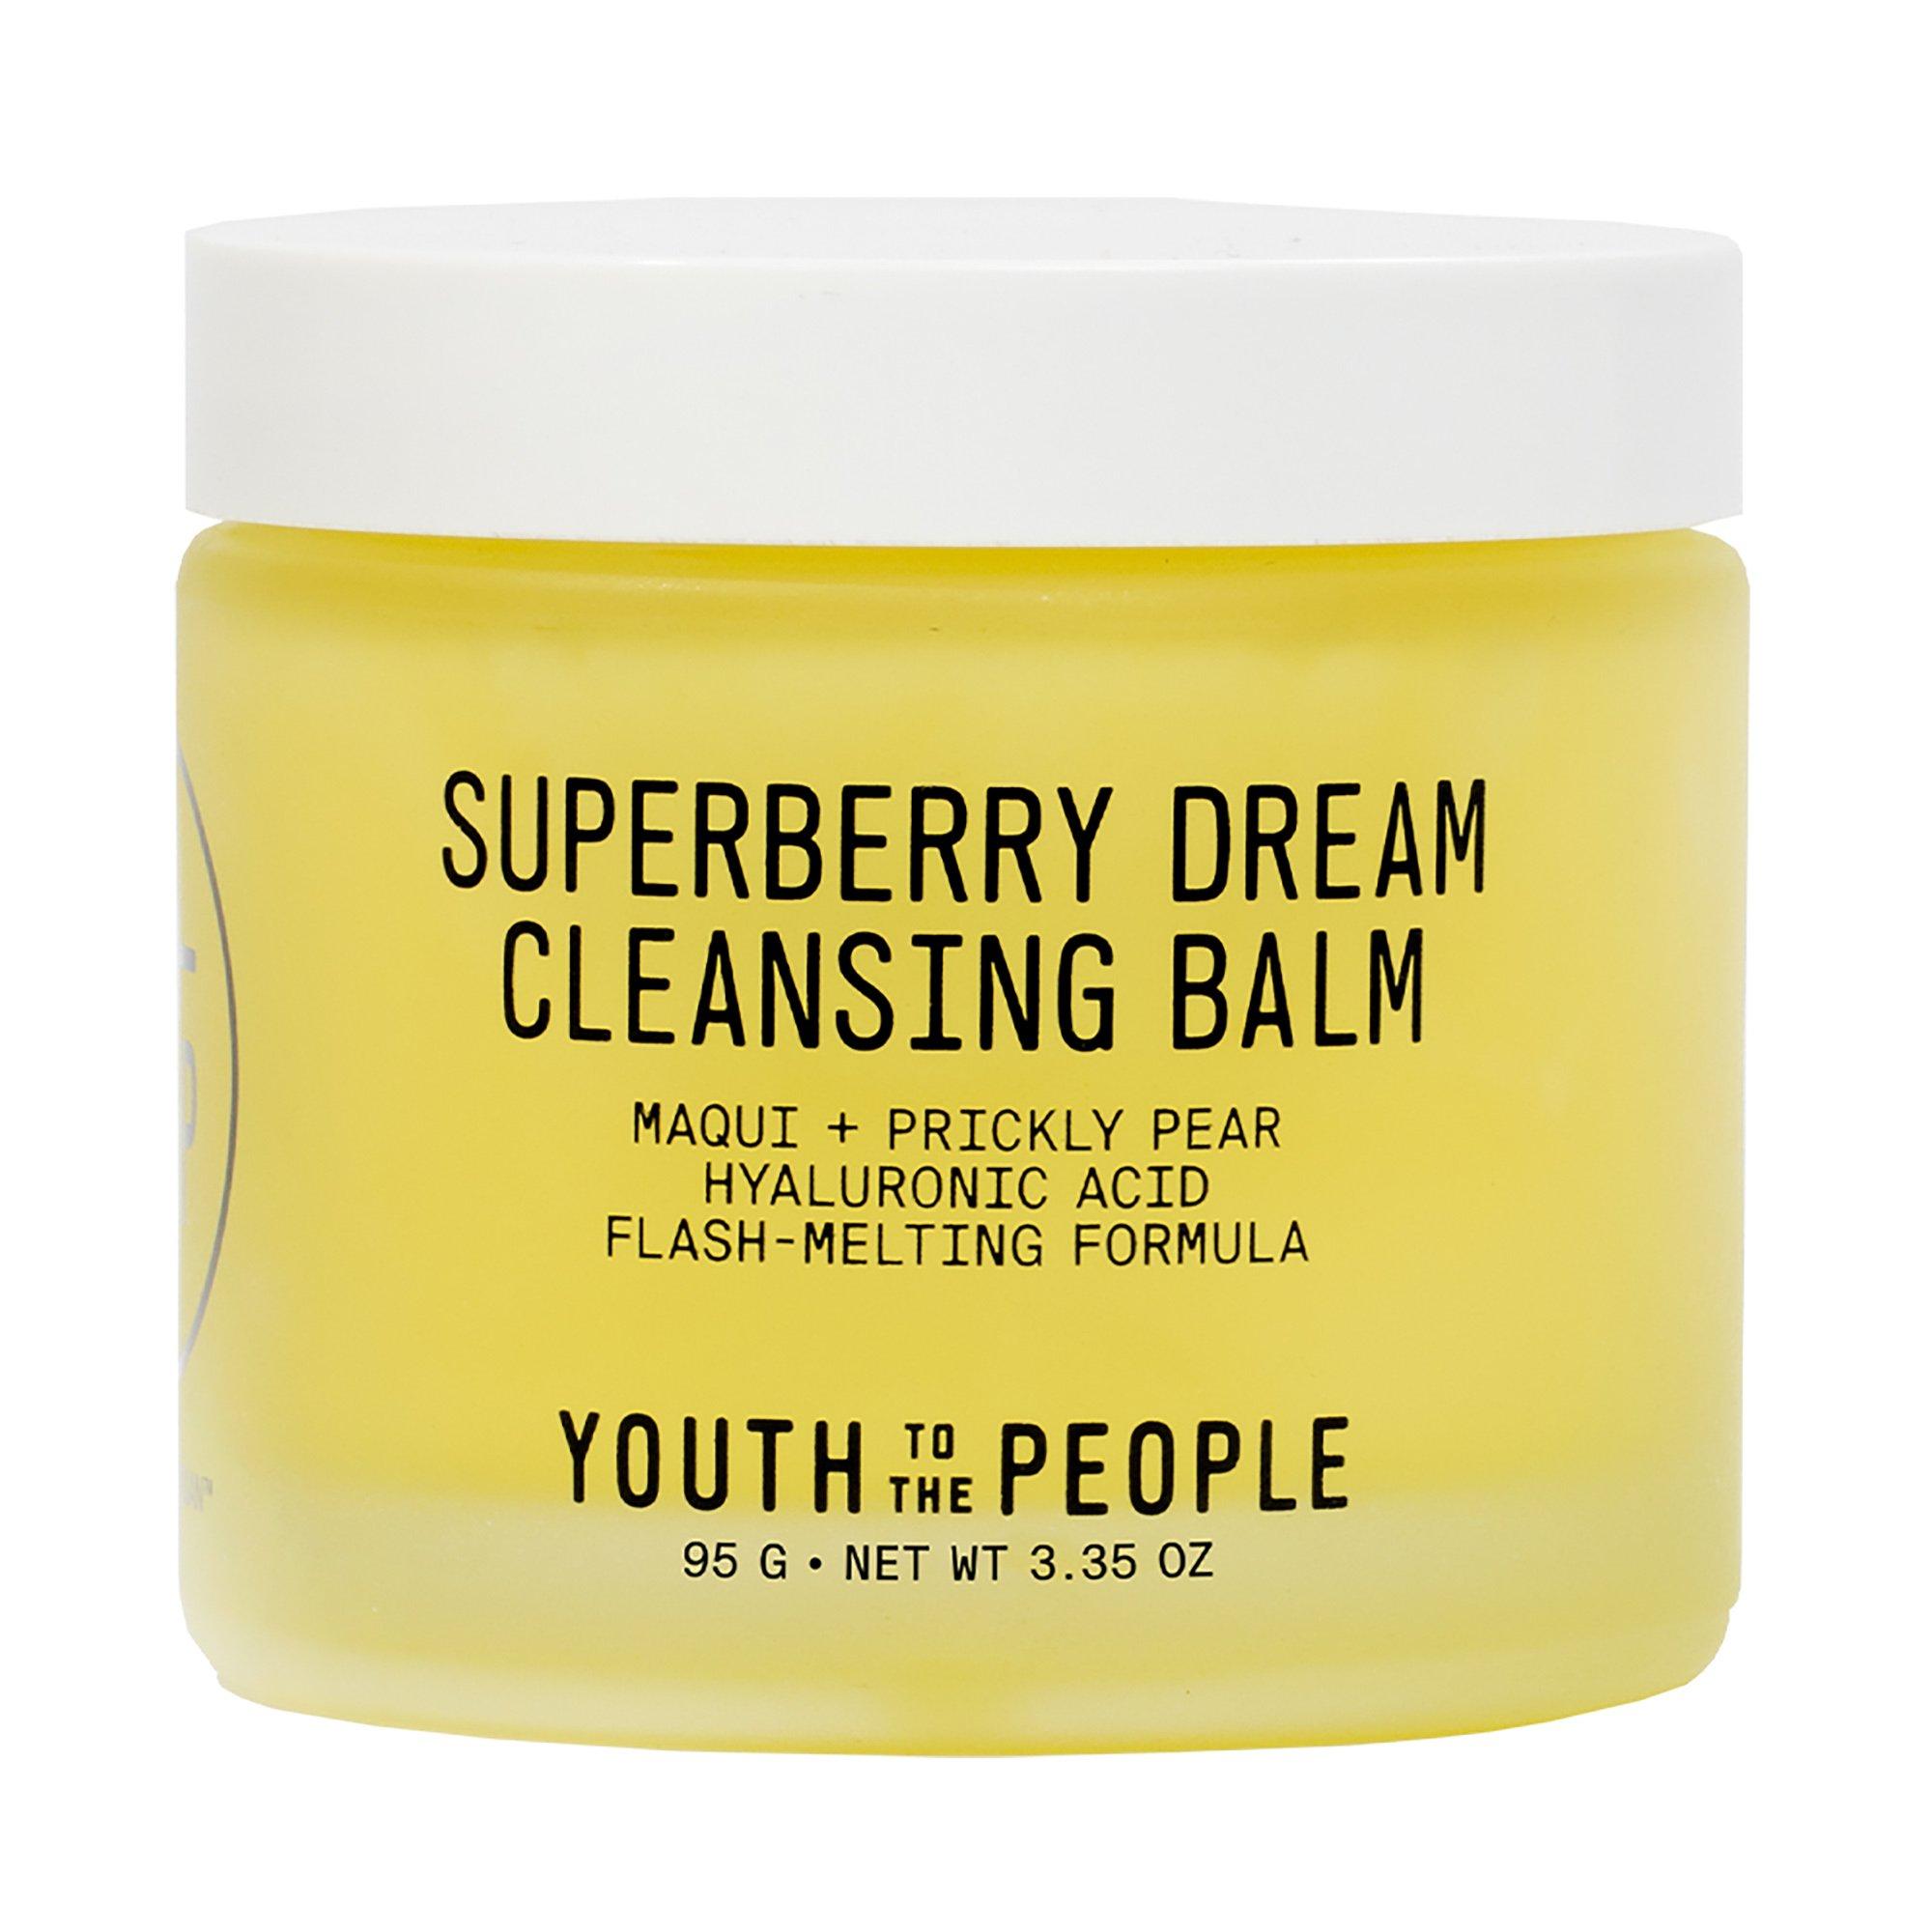 Image of YOUTH TO THE PEOPLE Superberry Dream Cleansing Balm - 95G